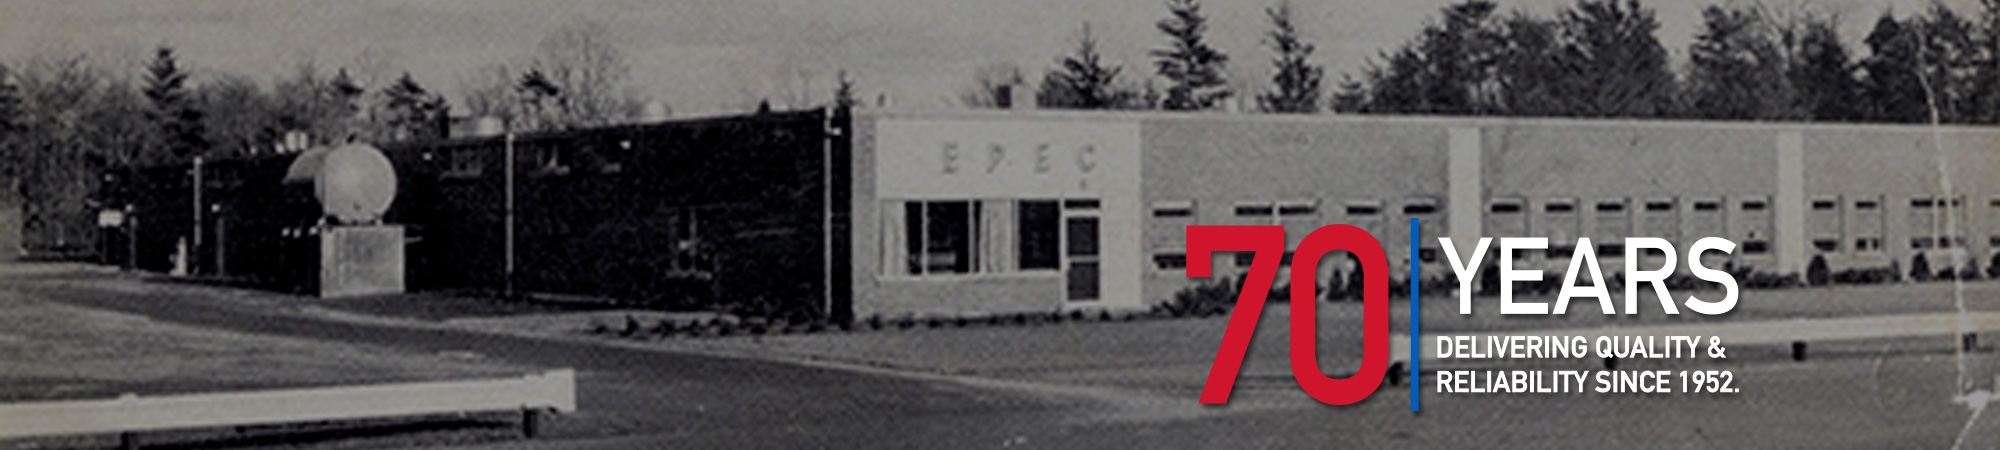 Celebrating 70 Years of Delivering Quality and Reliability